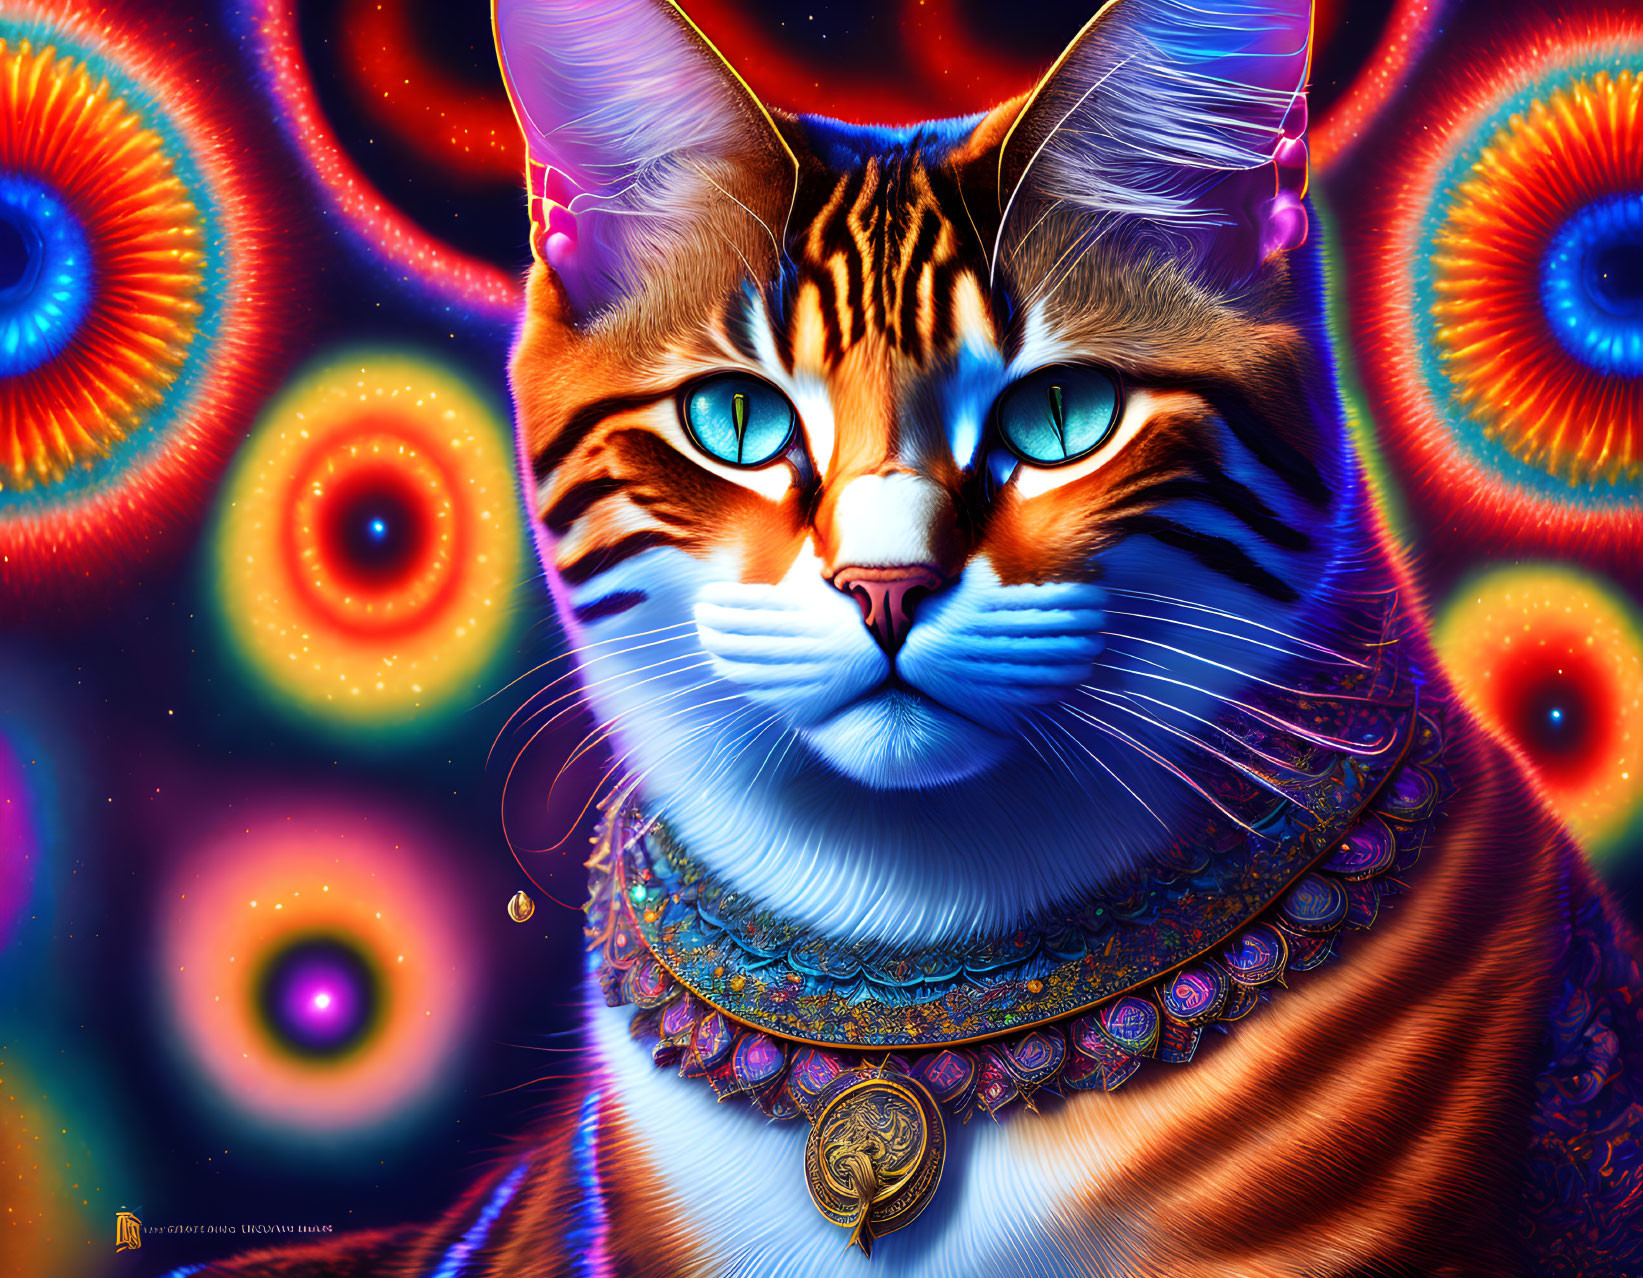 Colorful Digital Art: Cat with Blue Eyes and Psychedelic Background